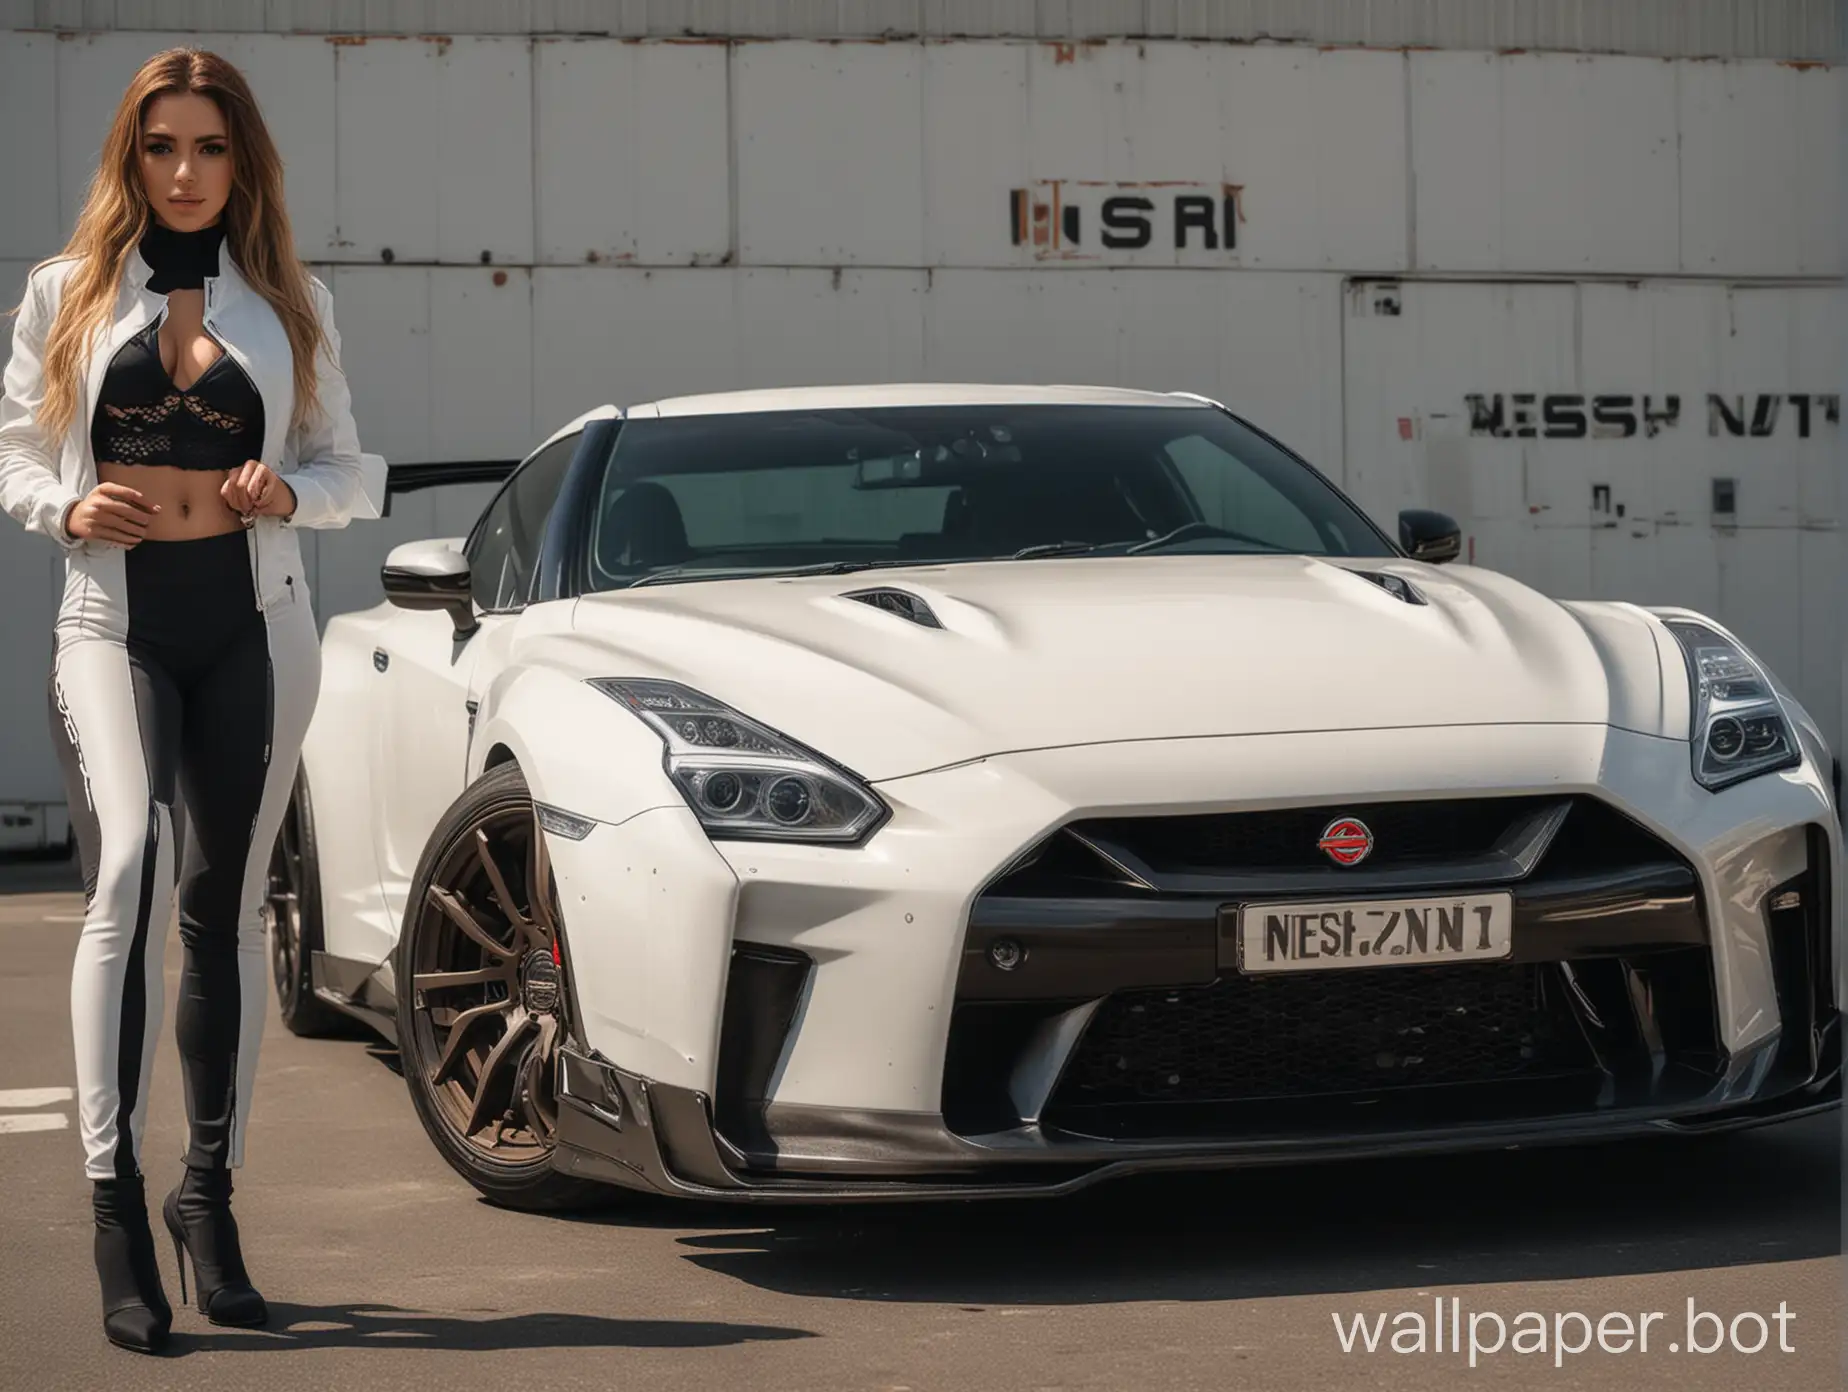 super model standing next to a nissan gtr with a widebody kit and the numberplate on the car that says"NESH-ZN"